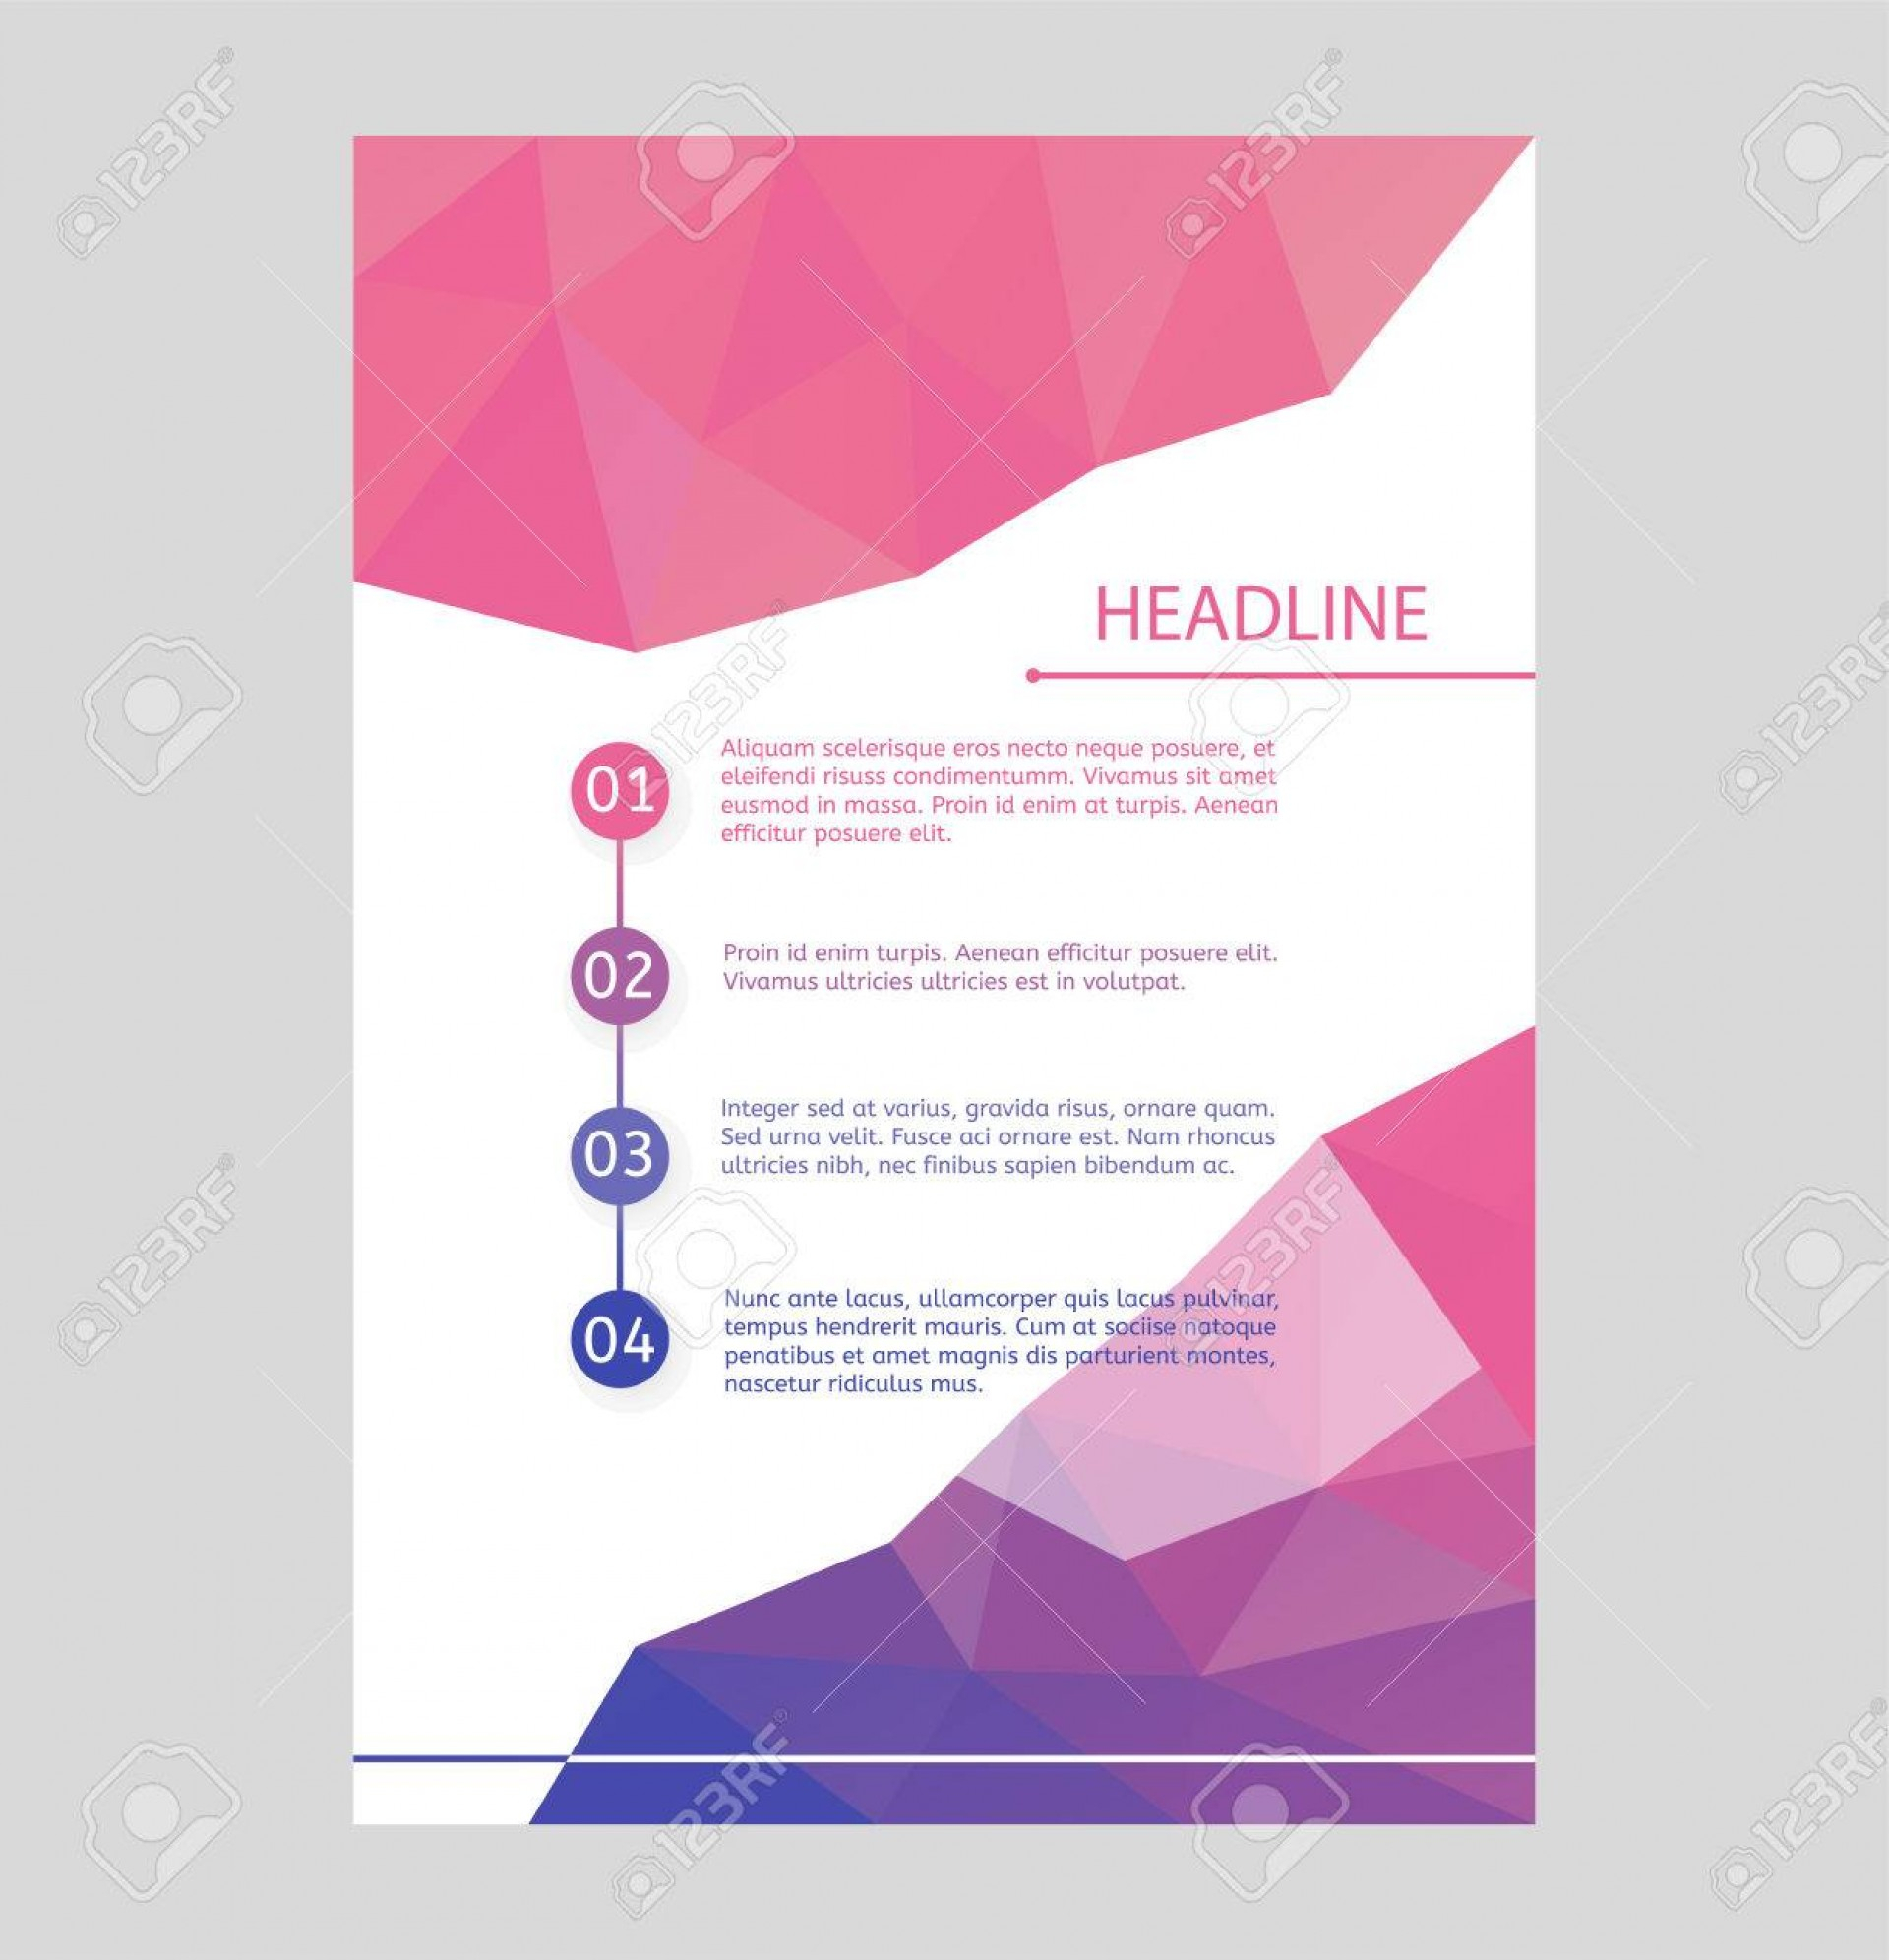 003 Free Blank Flyer Templates Template Unusual Ideas Inside Blank Templates For Flyers